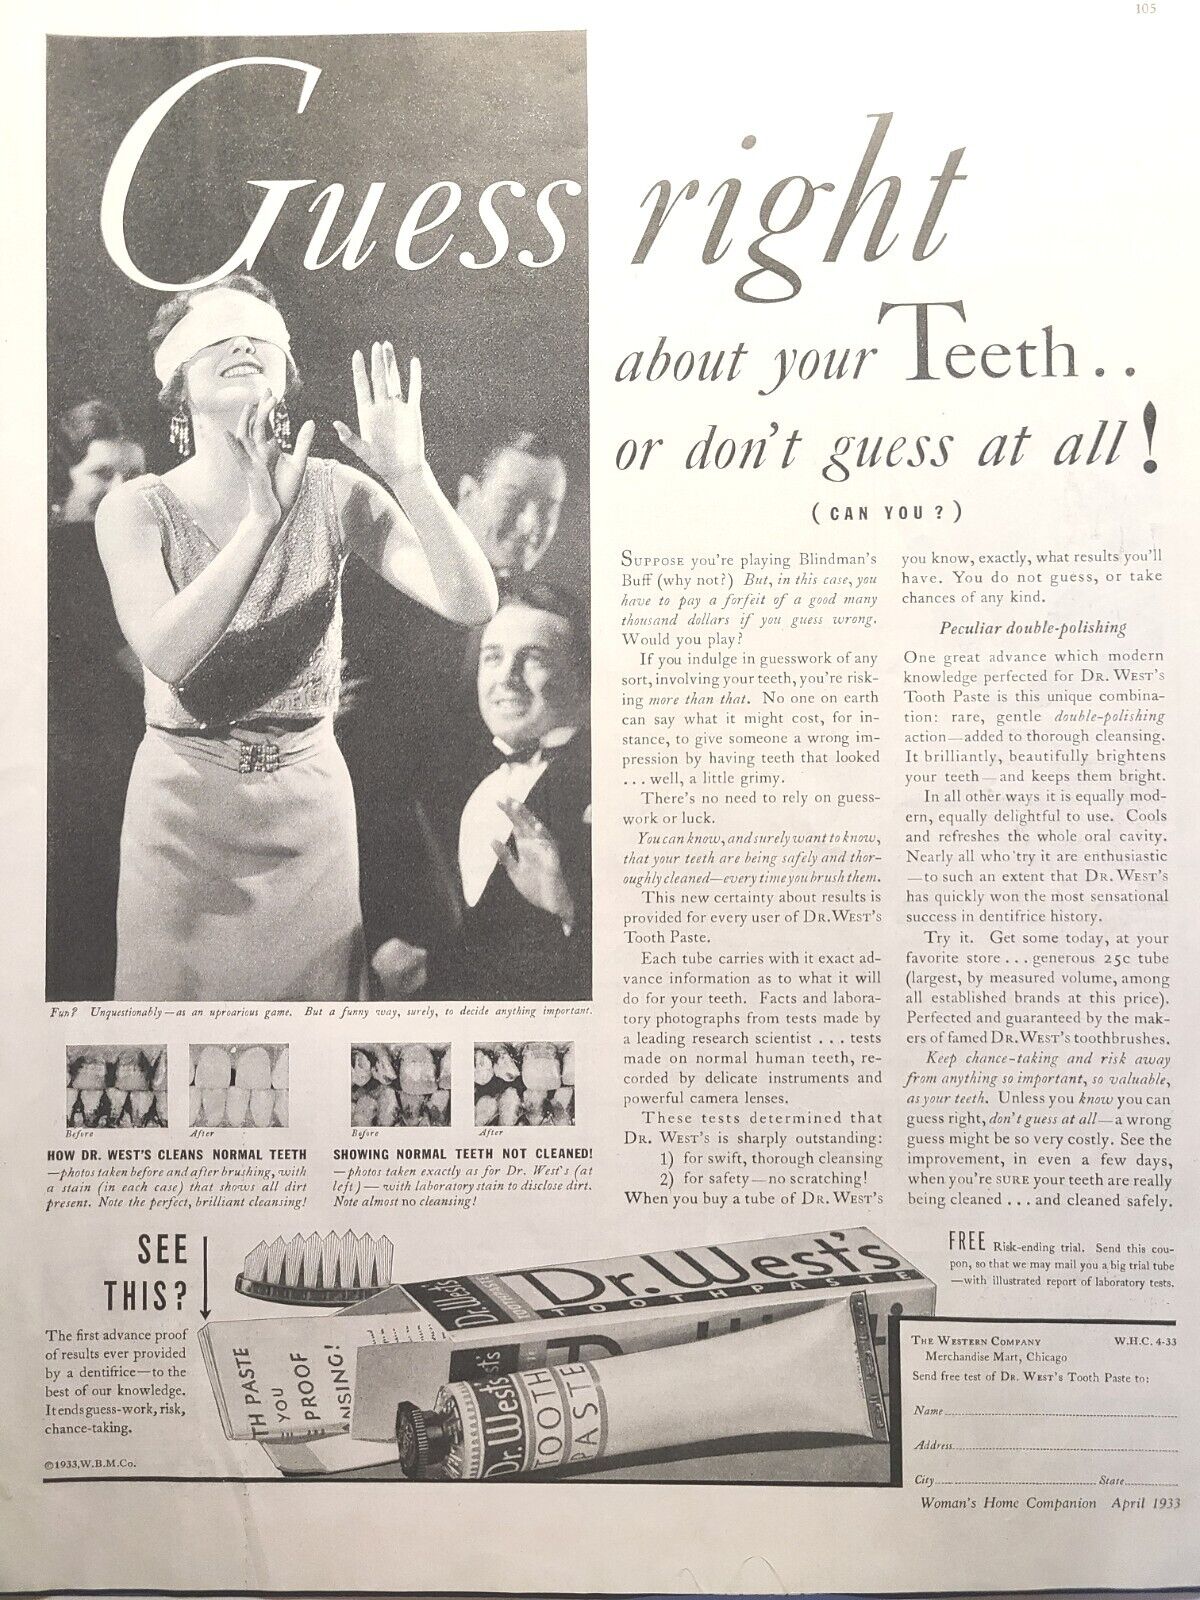 Dr. West's Tooth Paste Don't Guess Blindfolded Lady Party Vintage Print Ad 1933